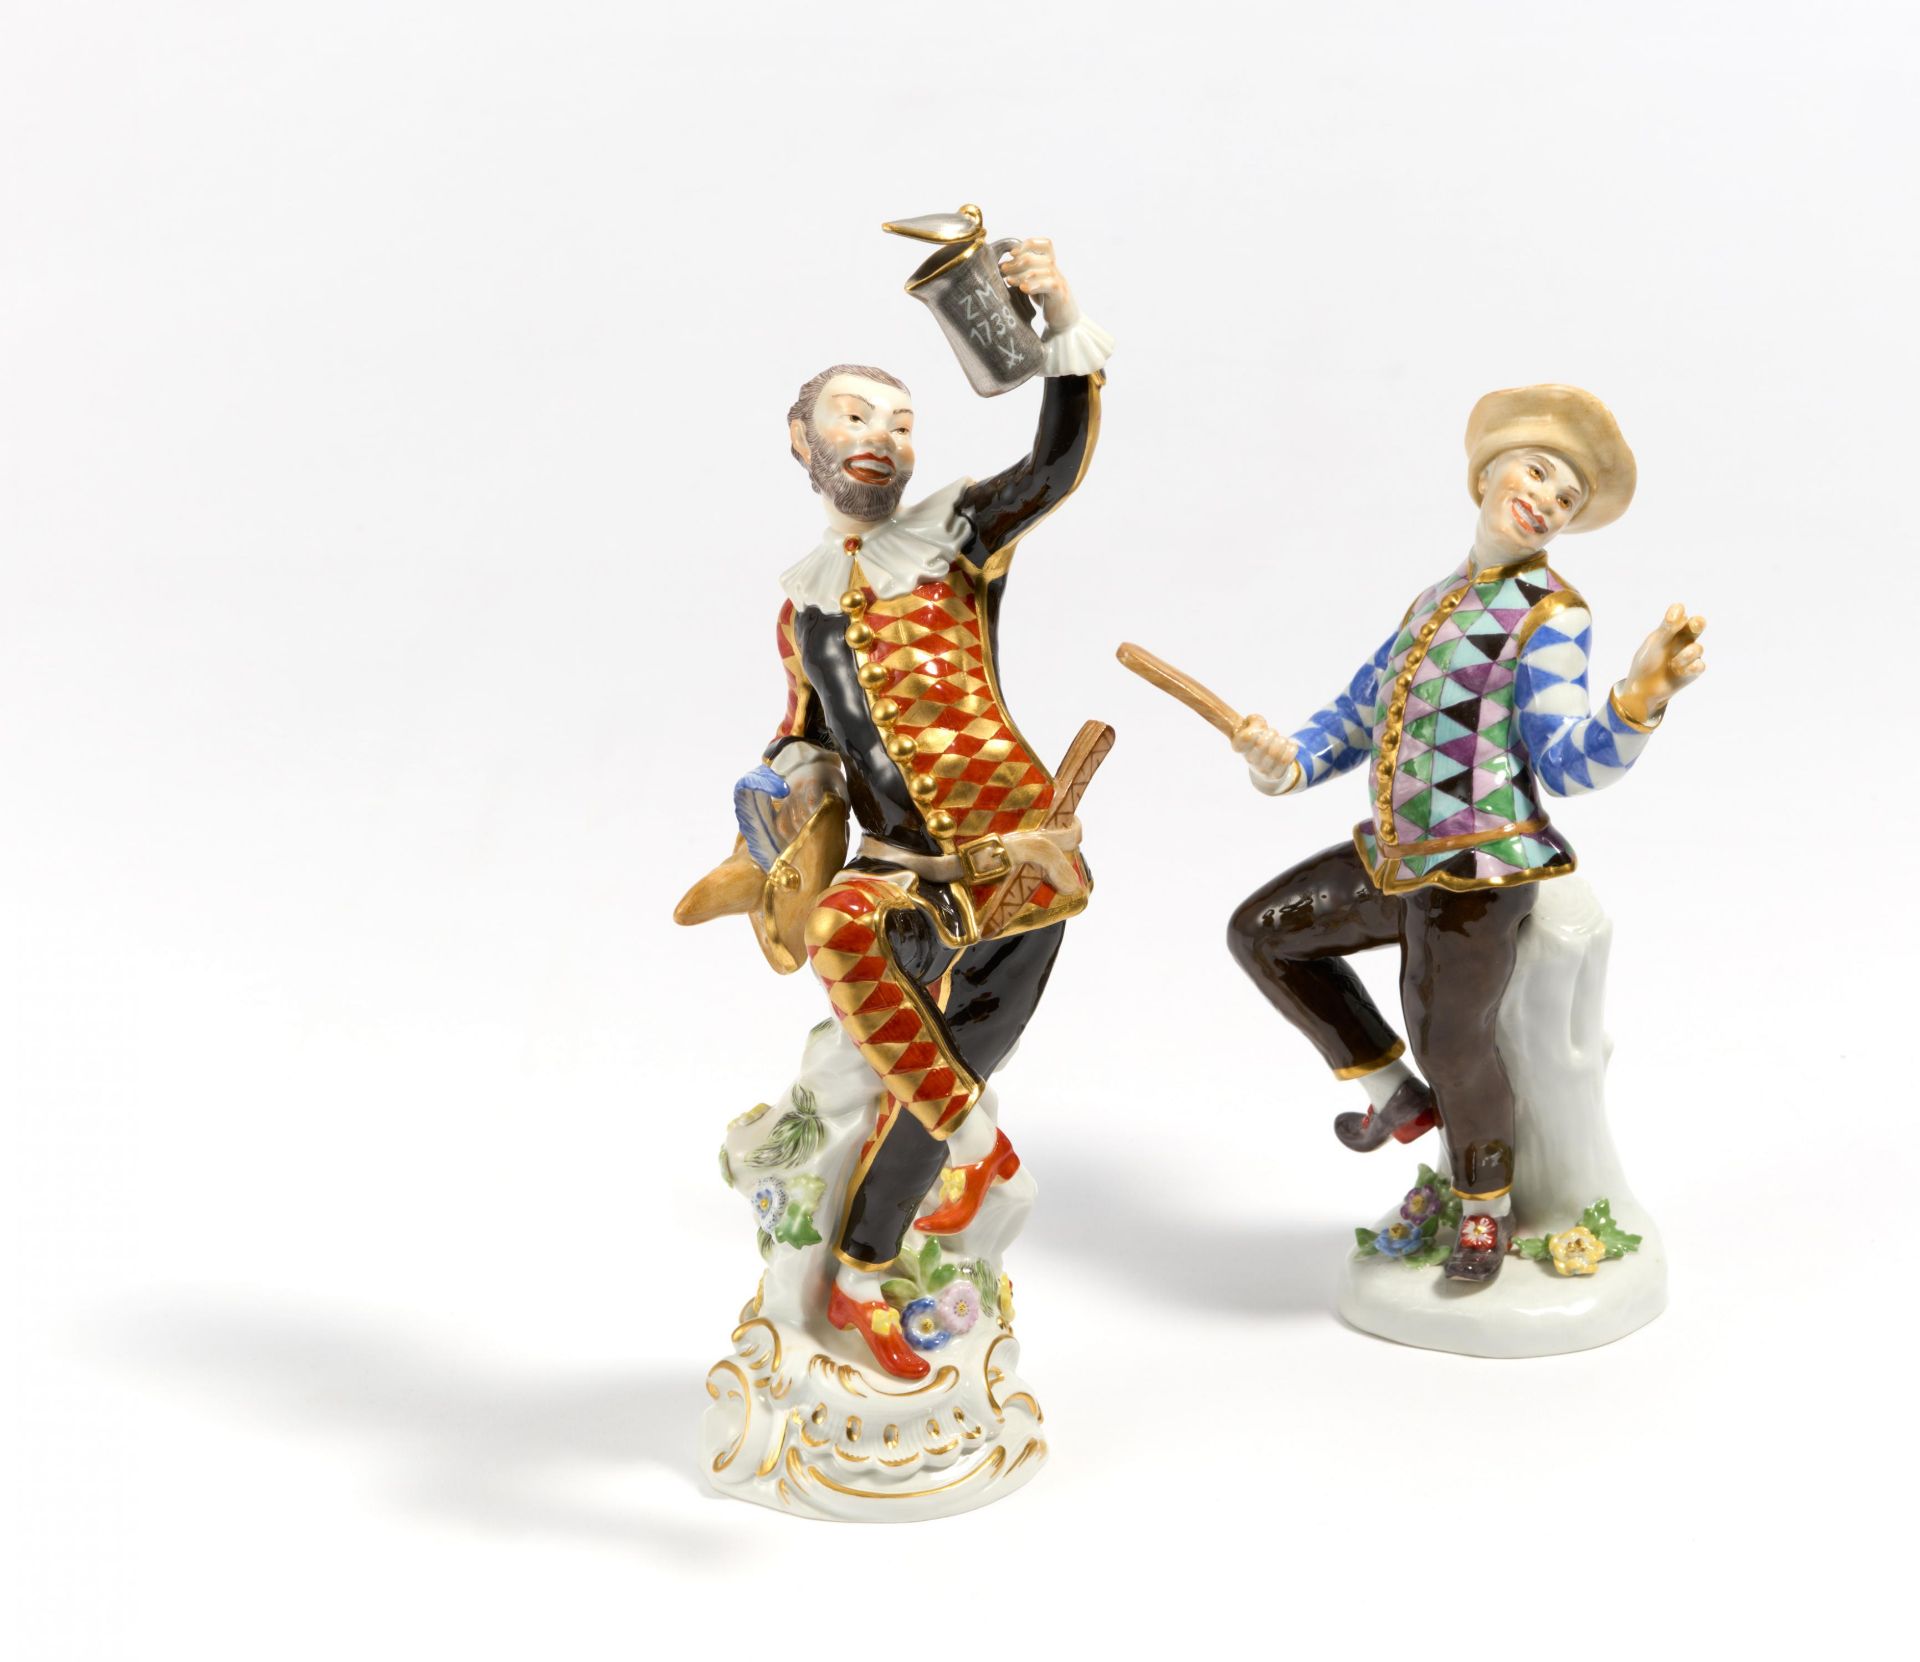 Harlequin with jug and Harlequin with slapstick from the Commedia dell'Arte